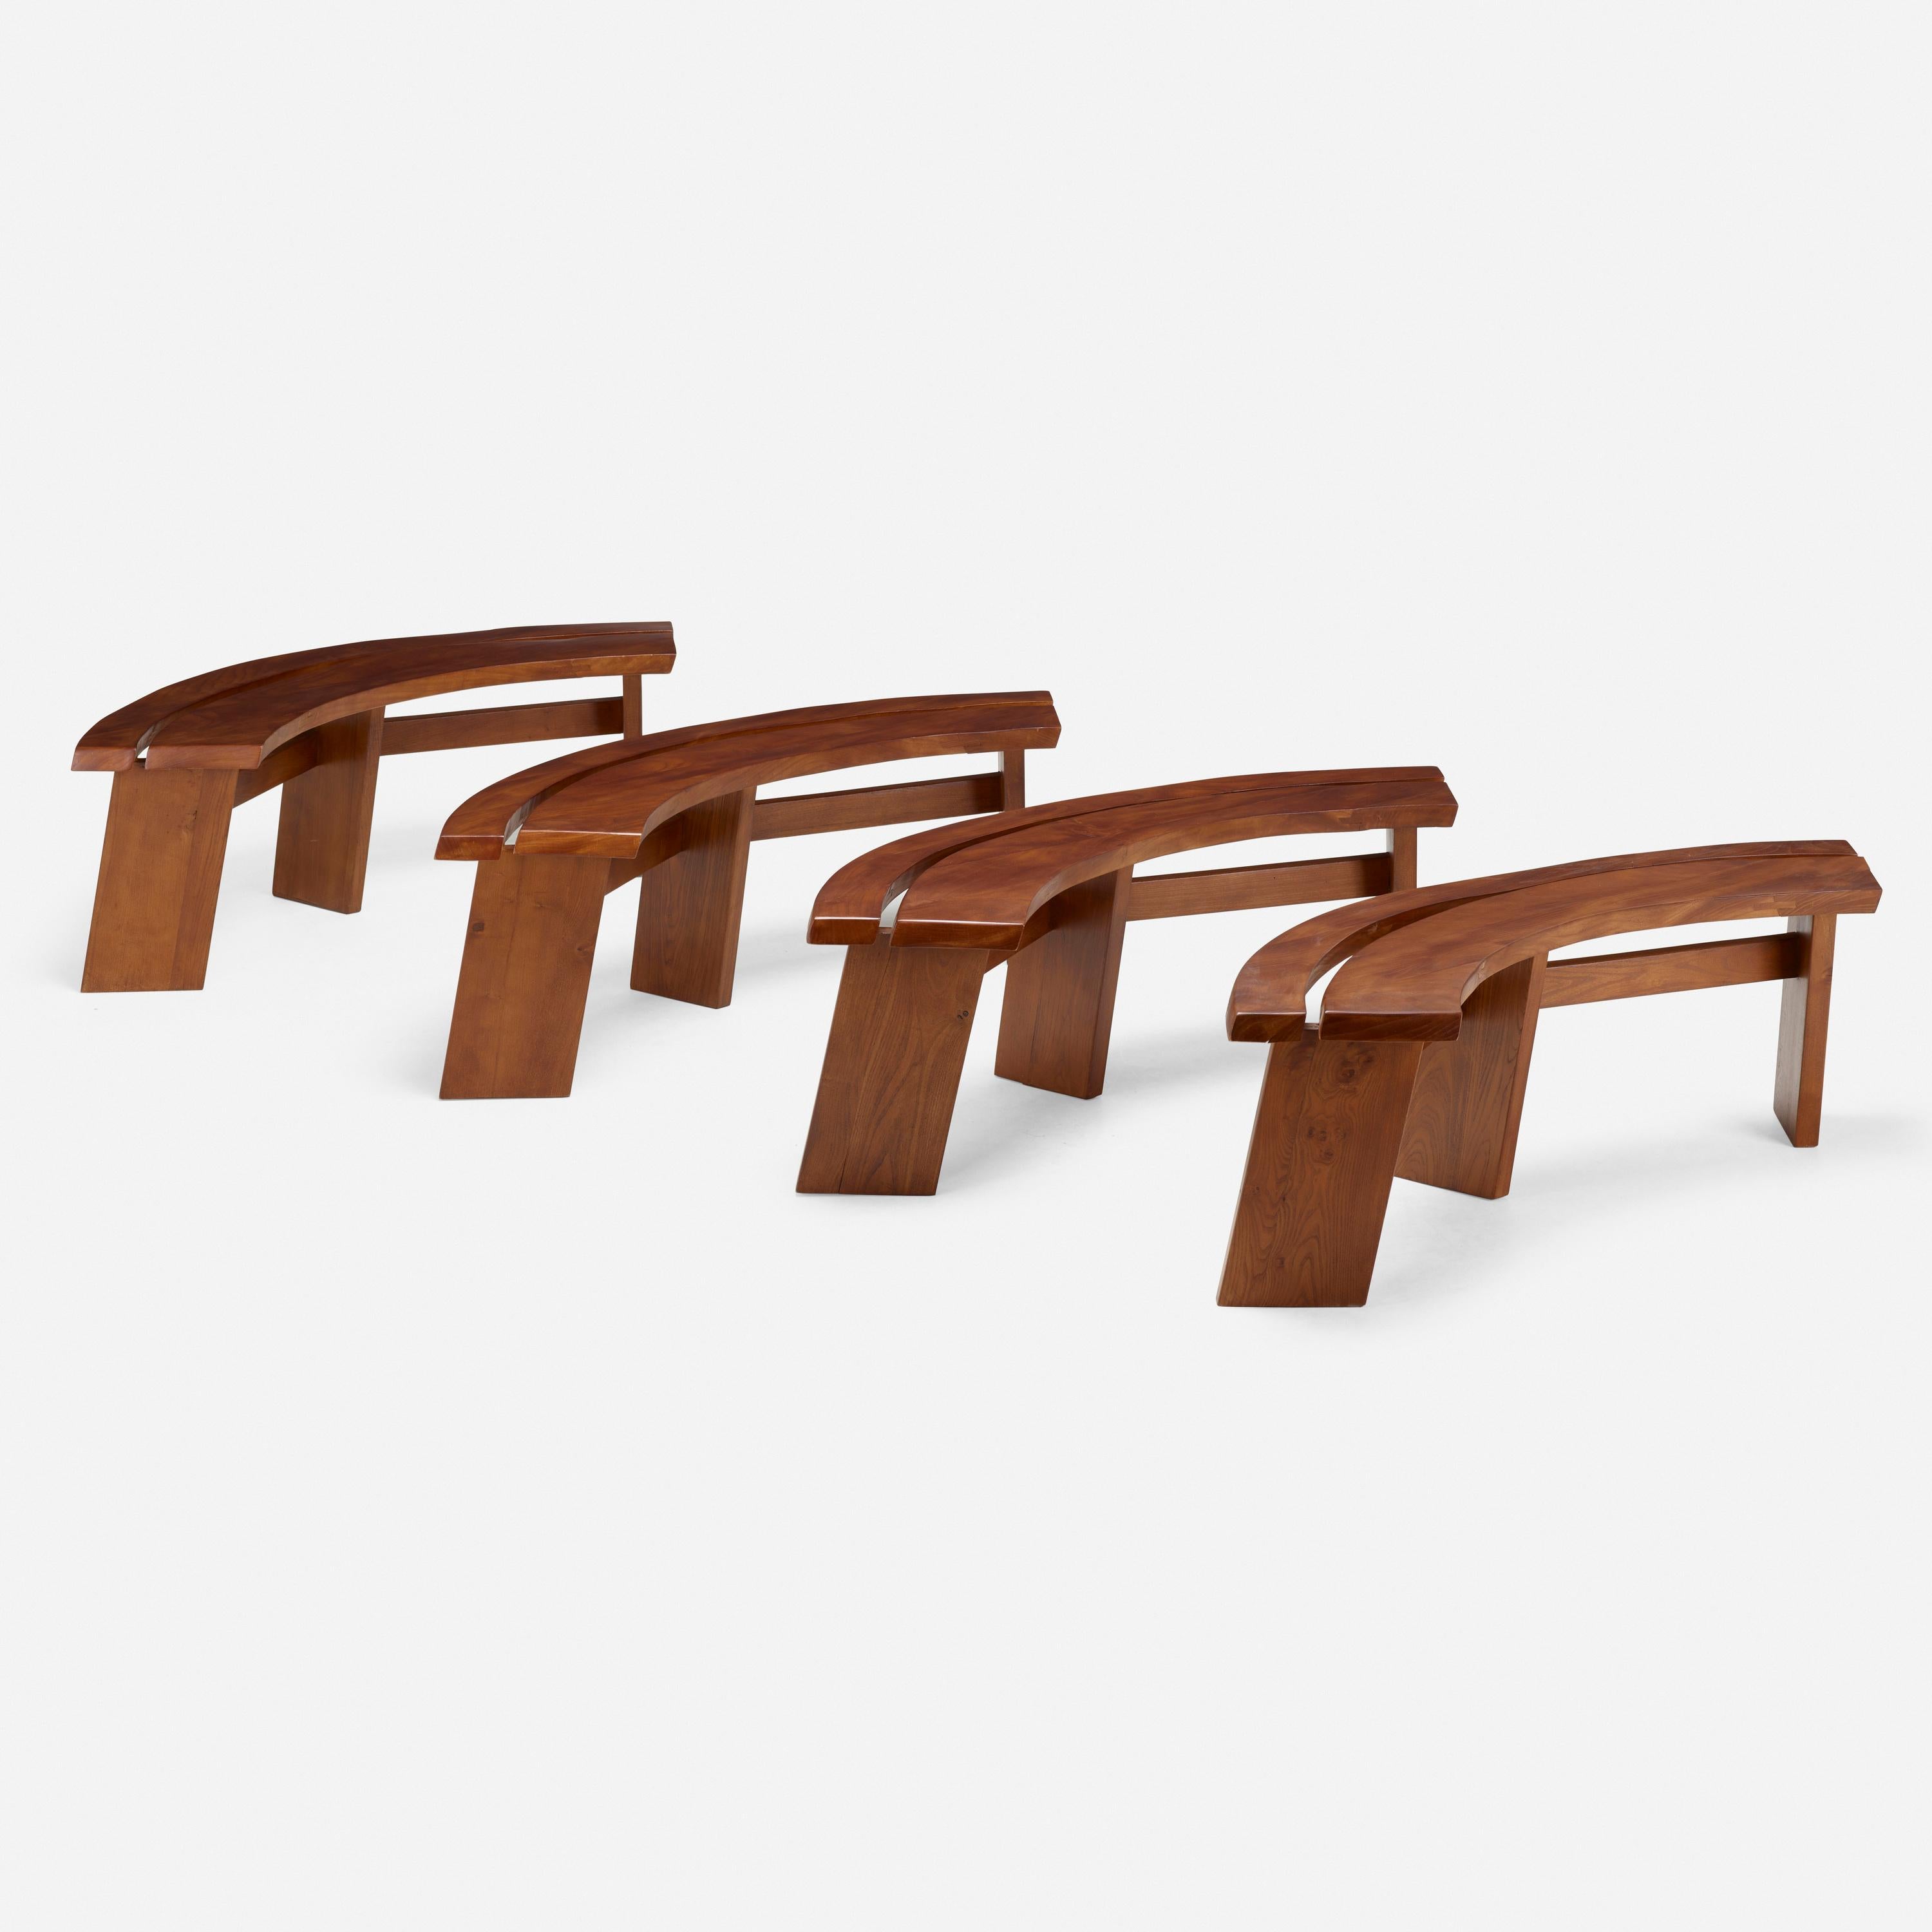 Set of four curved elm benches model S38 by Pierre Chapo.

